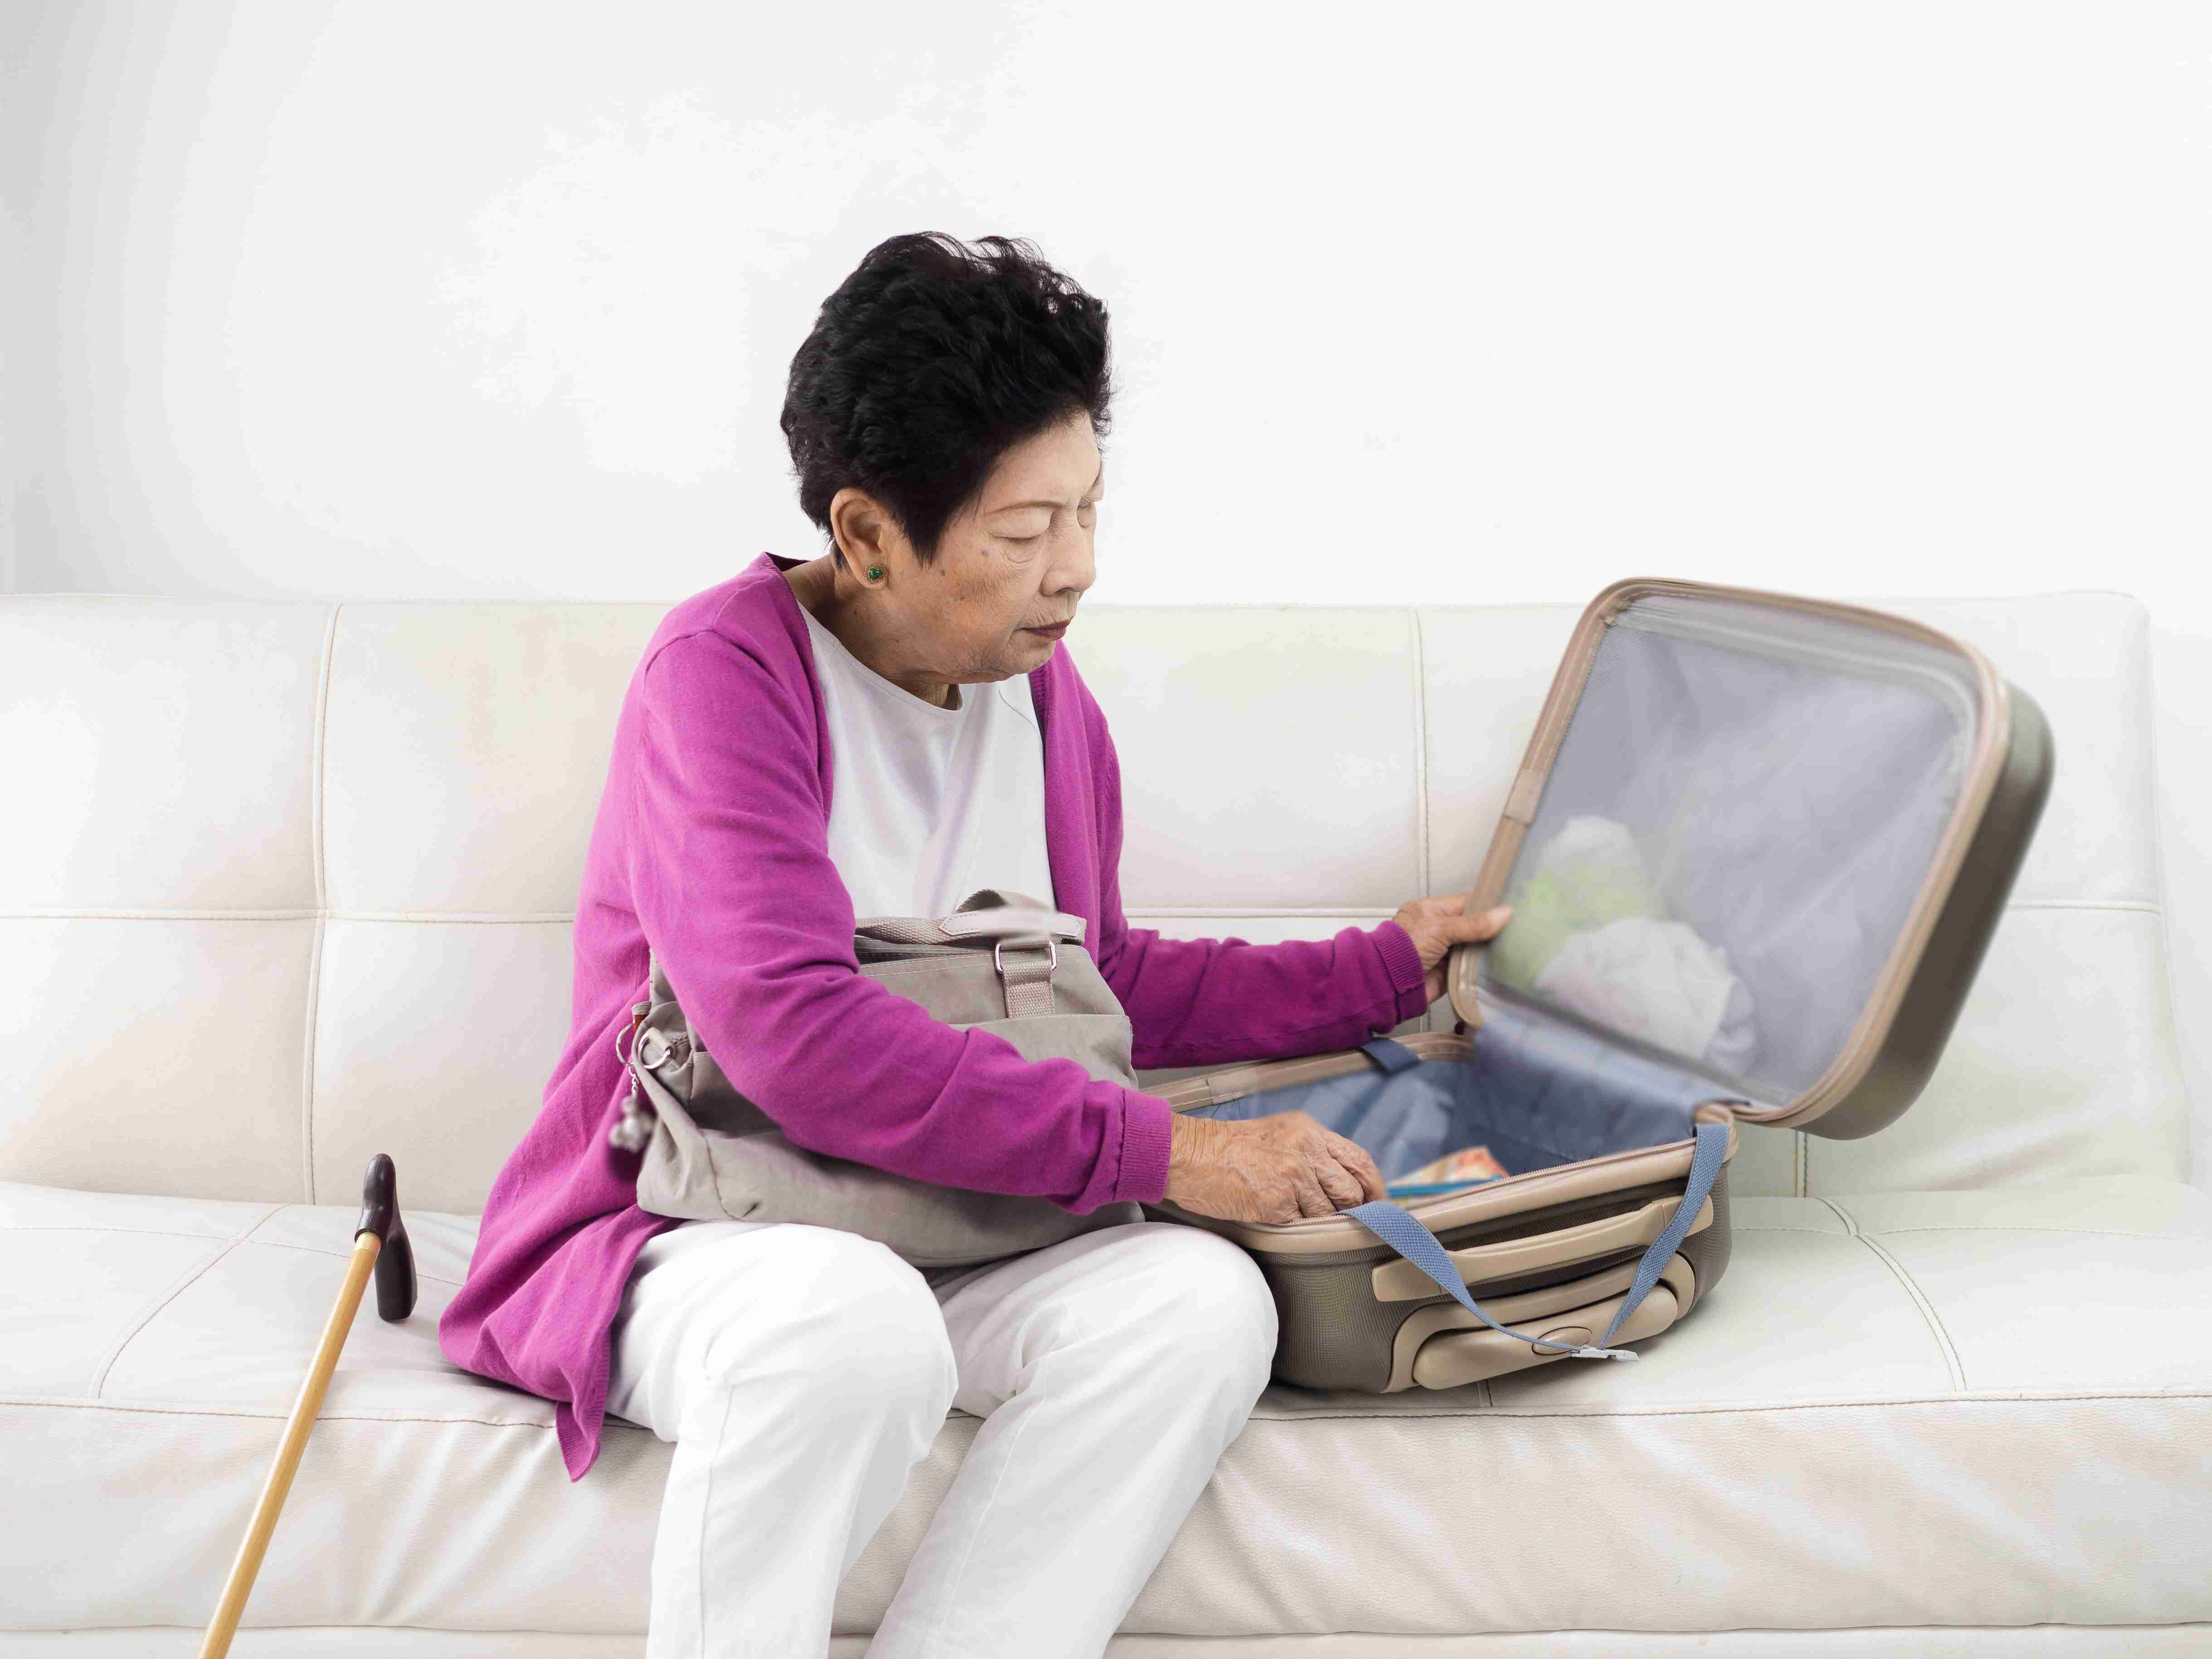 Elderly woman packing luggage to travel with dialysis